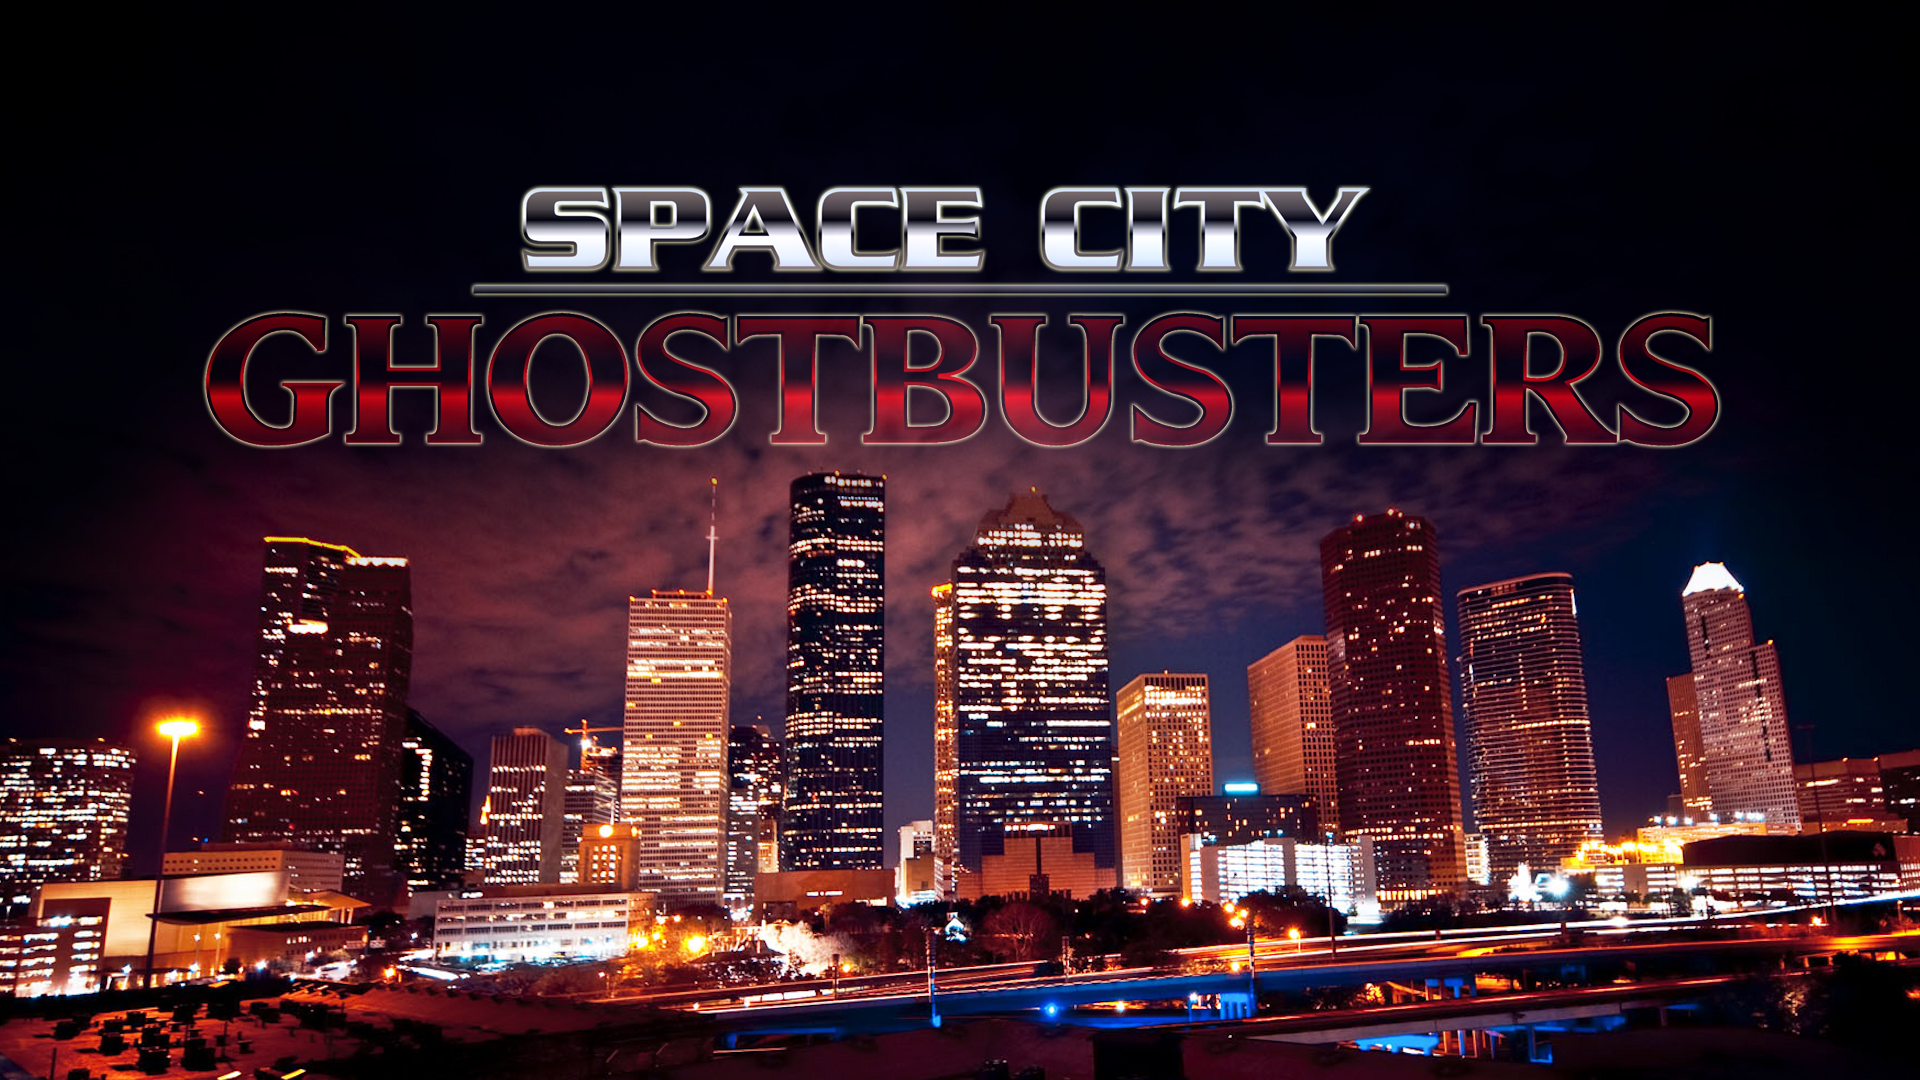 Space City Ghostbusters